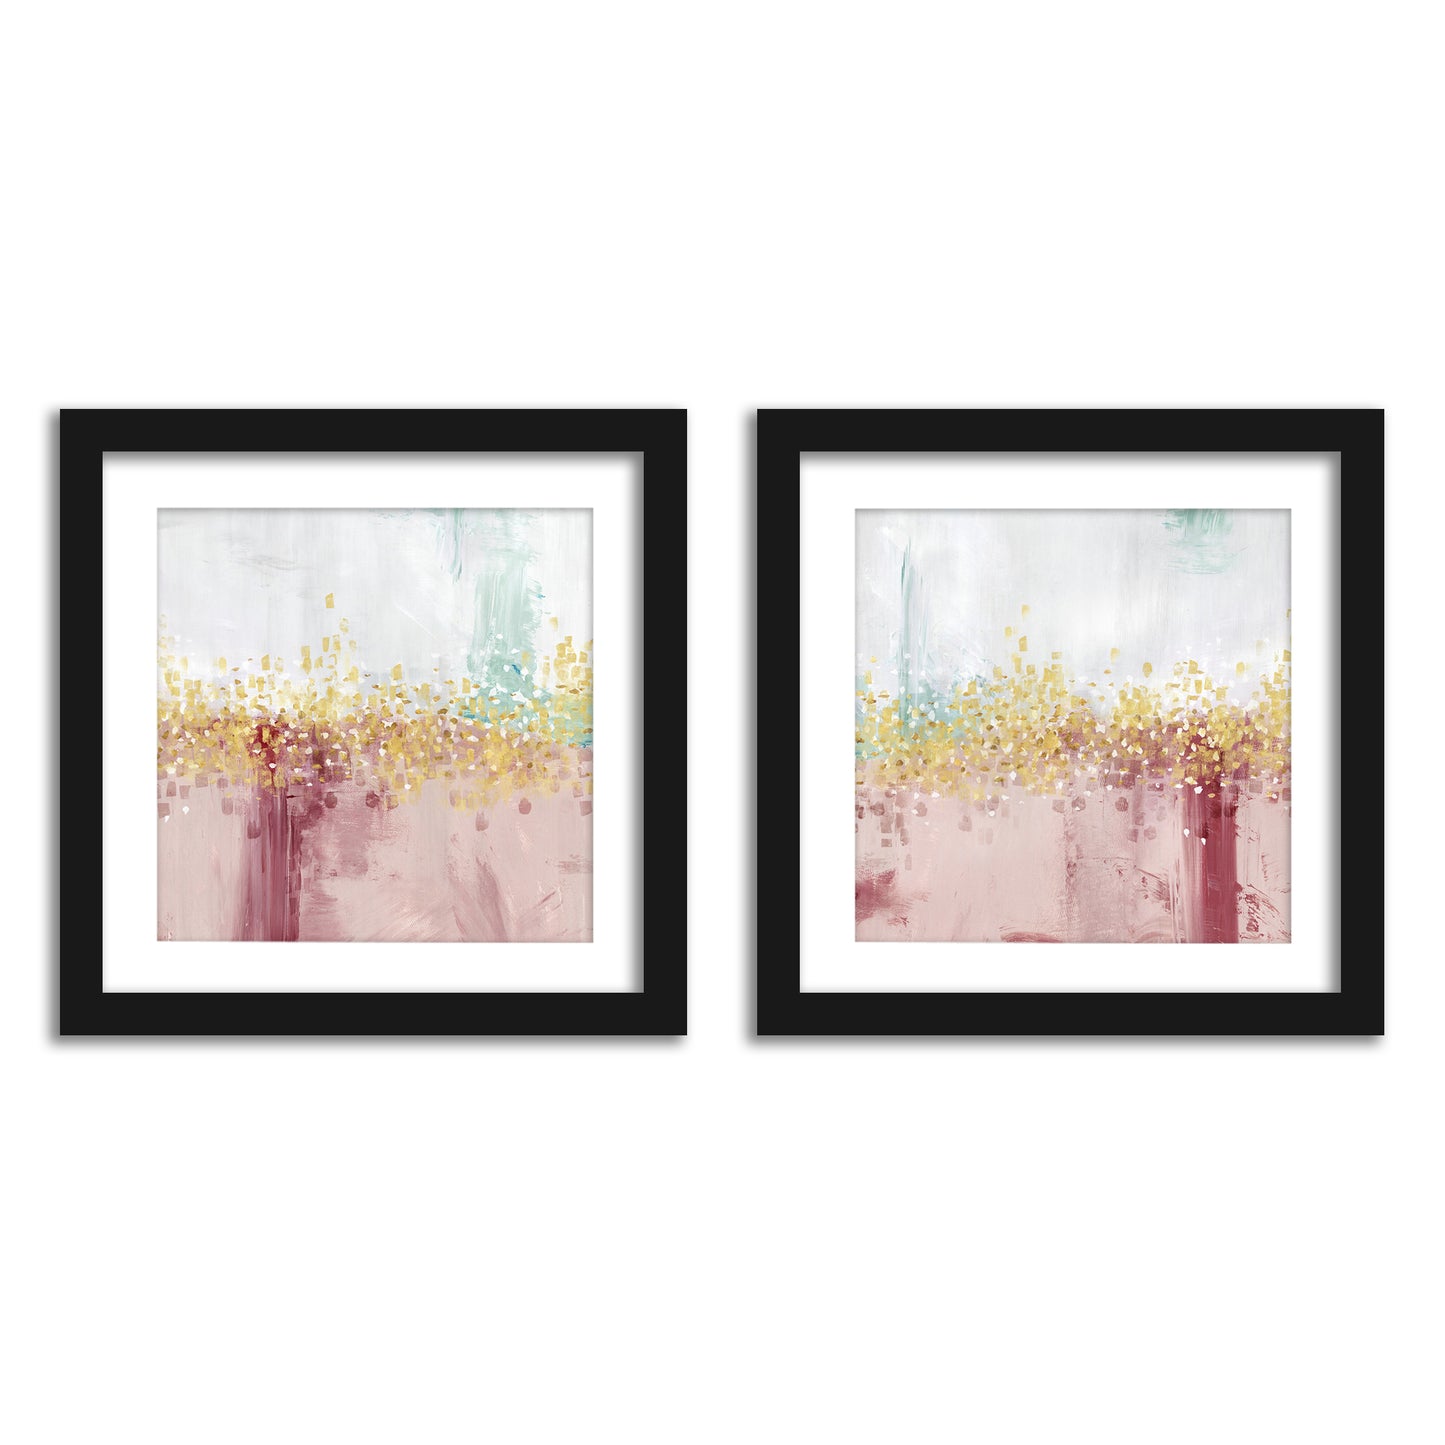  Pastel Clouds Bathroom Wall Art - Set of 2 Framed Prints by PI Creative